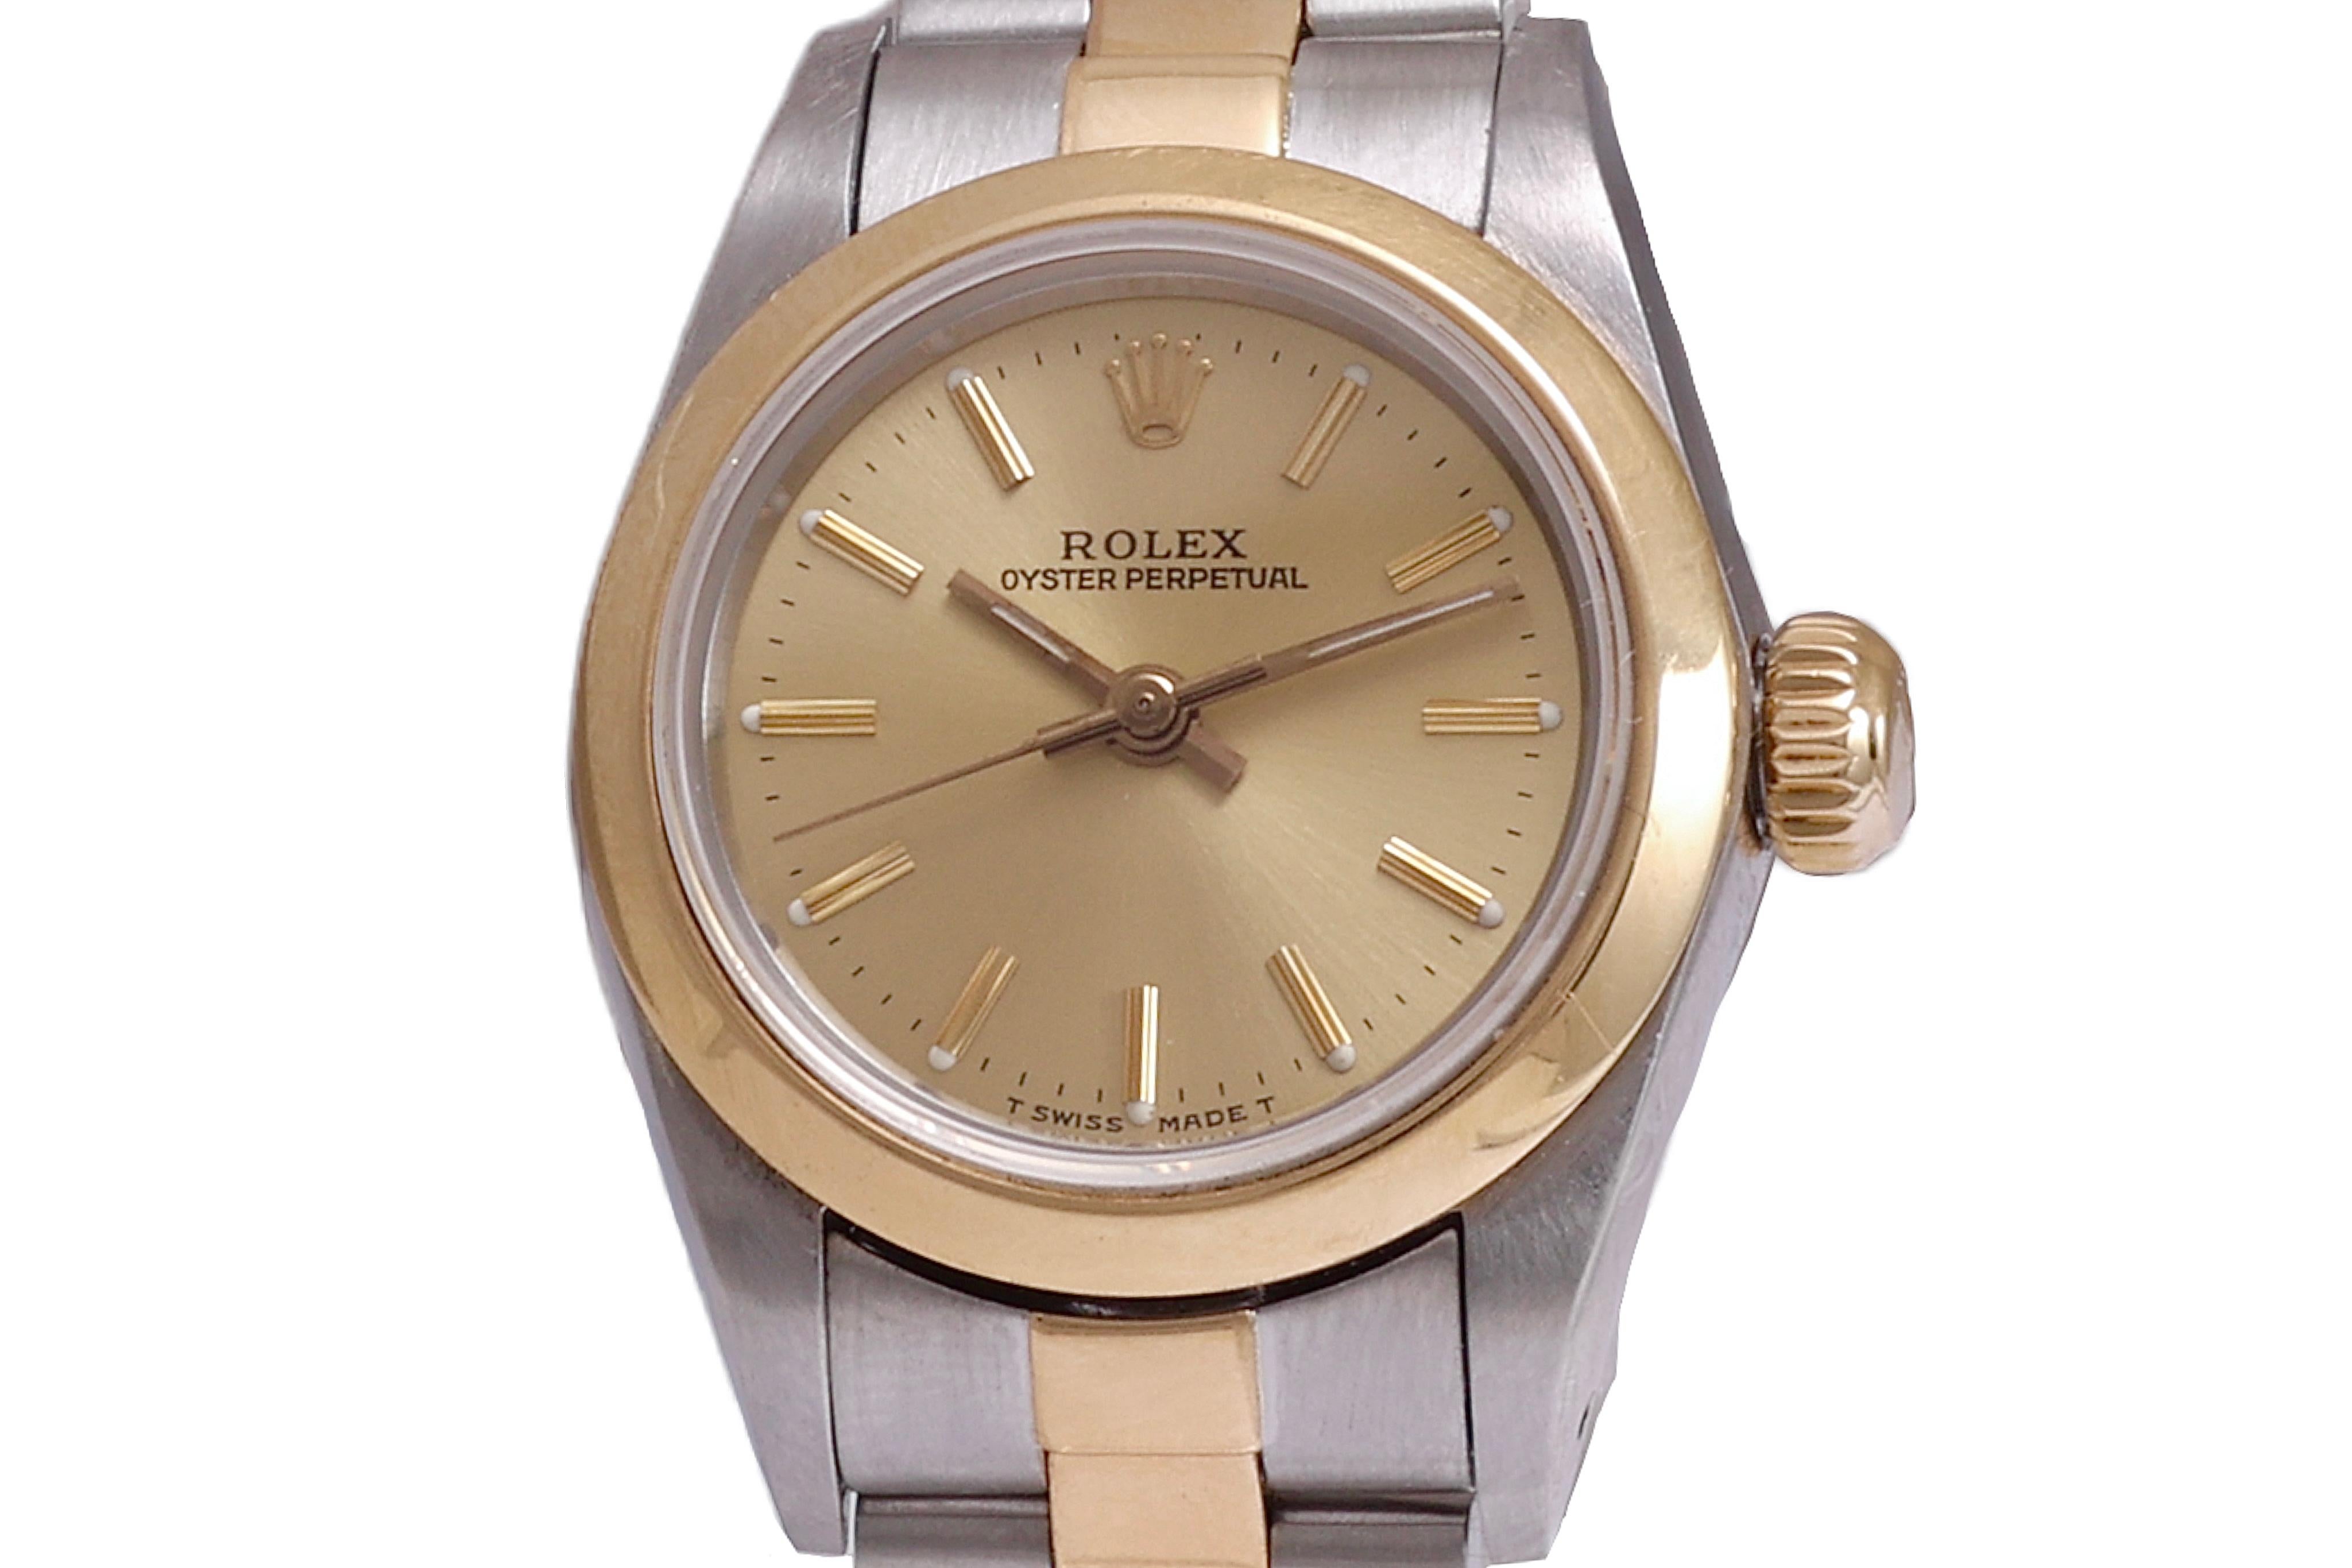 Rolex 18 Kt Gold & Steel Ref 67183 Lady Oyster Perpetual

Case : Gold & Steel 25mm

Strap : Steel & Gold , to Fit a 16 Cm Wrist (links can be added)

Glass : Sapphire Crystal

Dial : Gold / Champagne